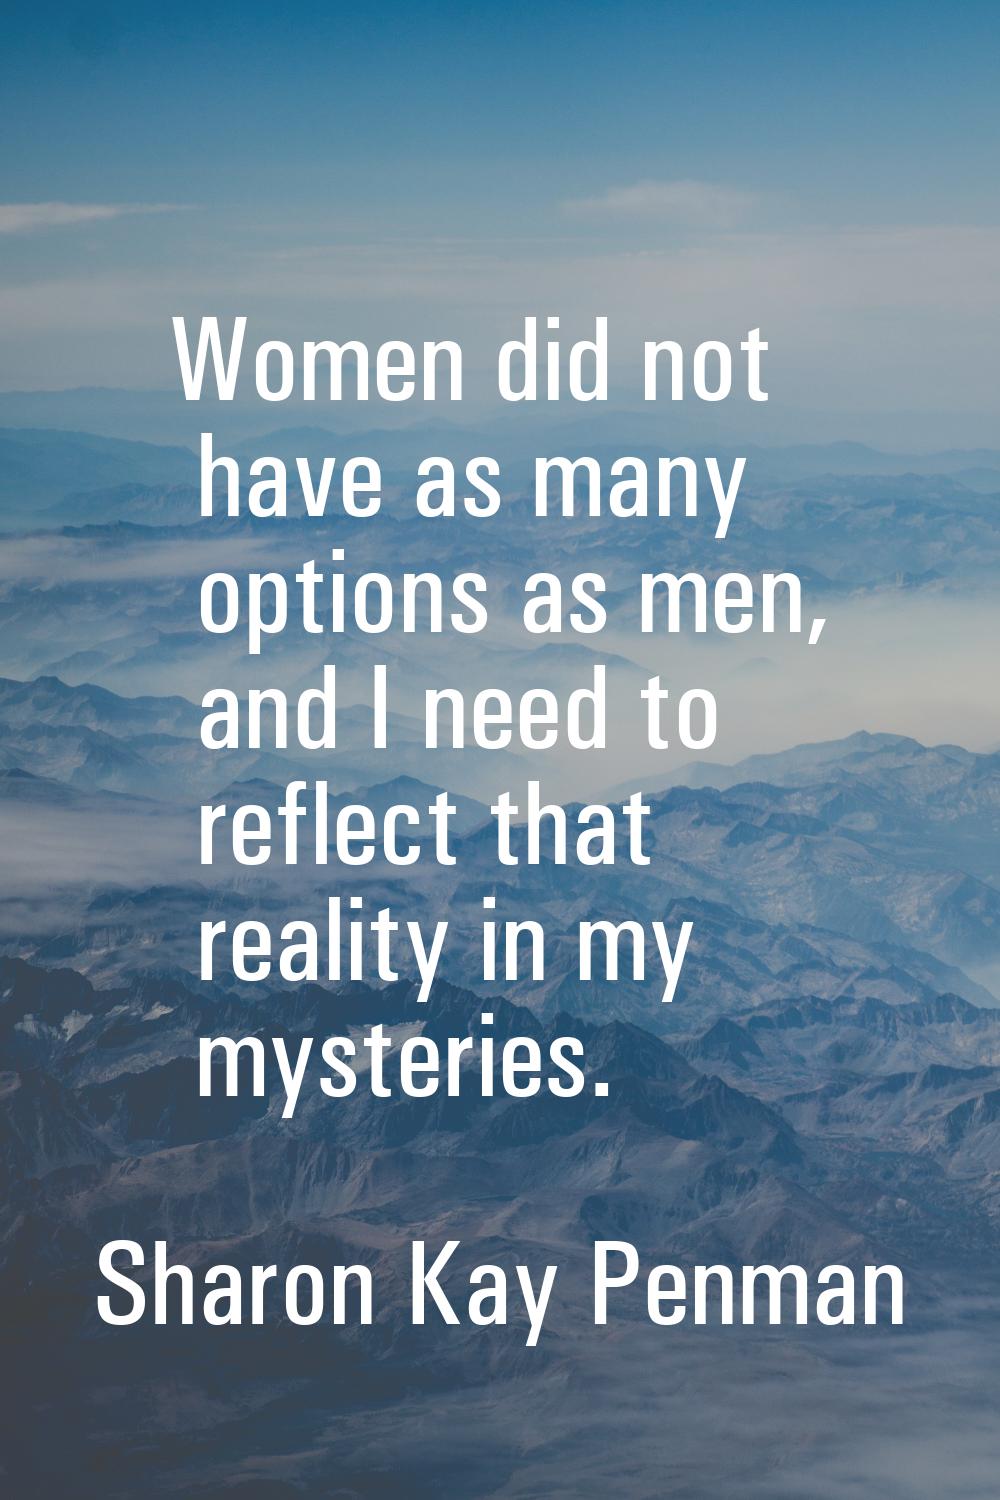 Women did not have as many options as men, and I need to reflect that reality in my mysteries.